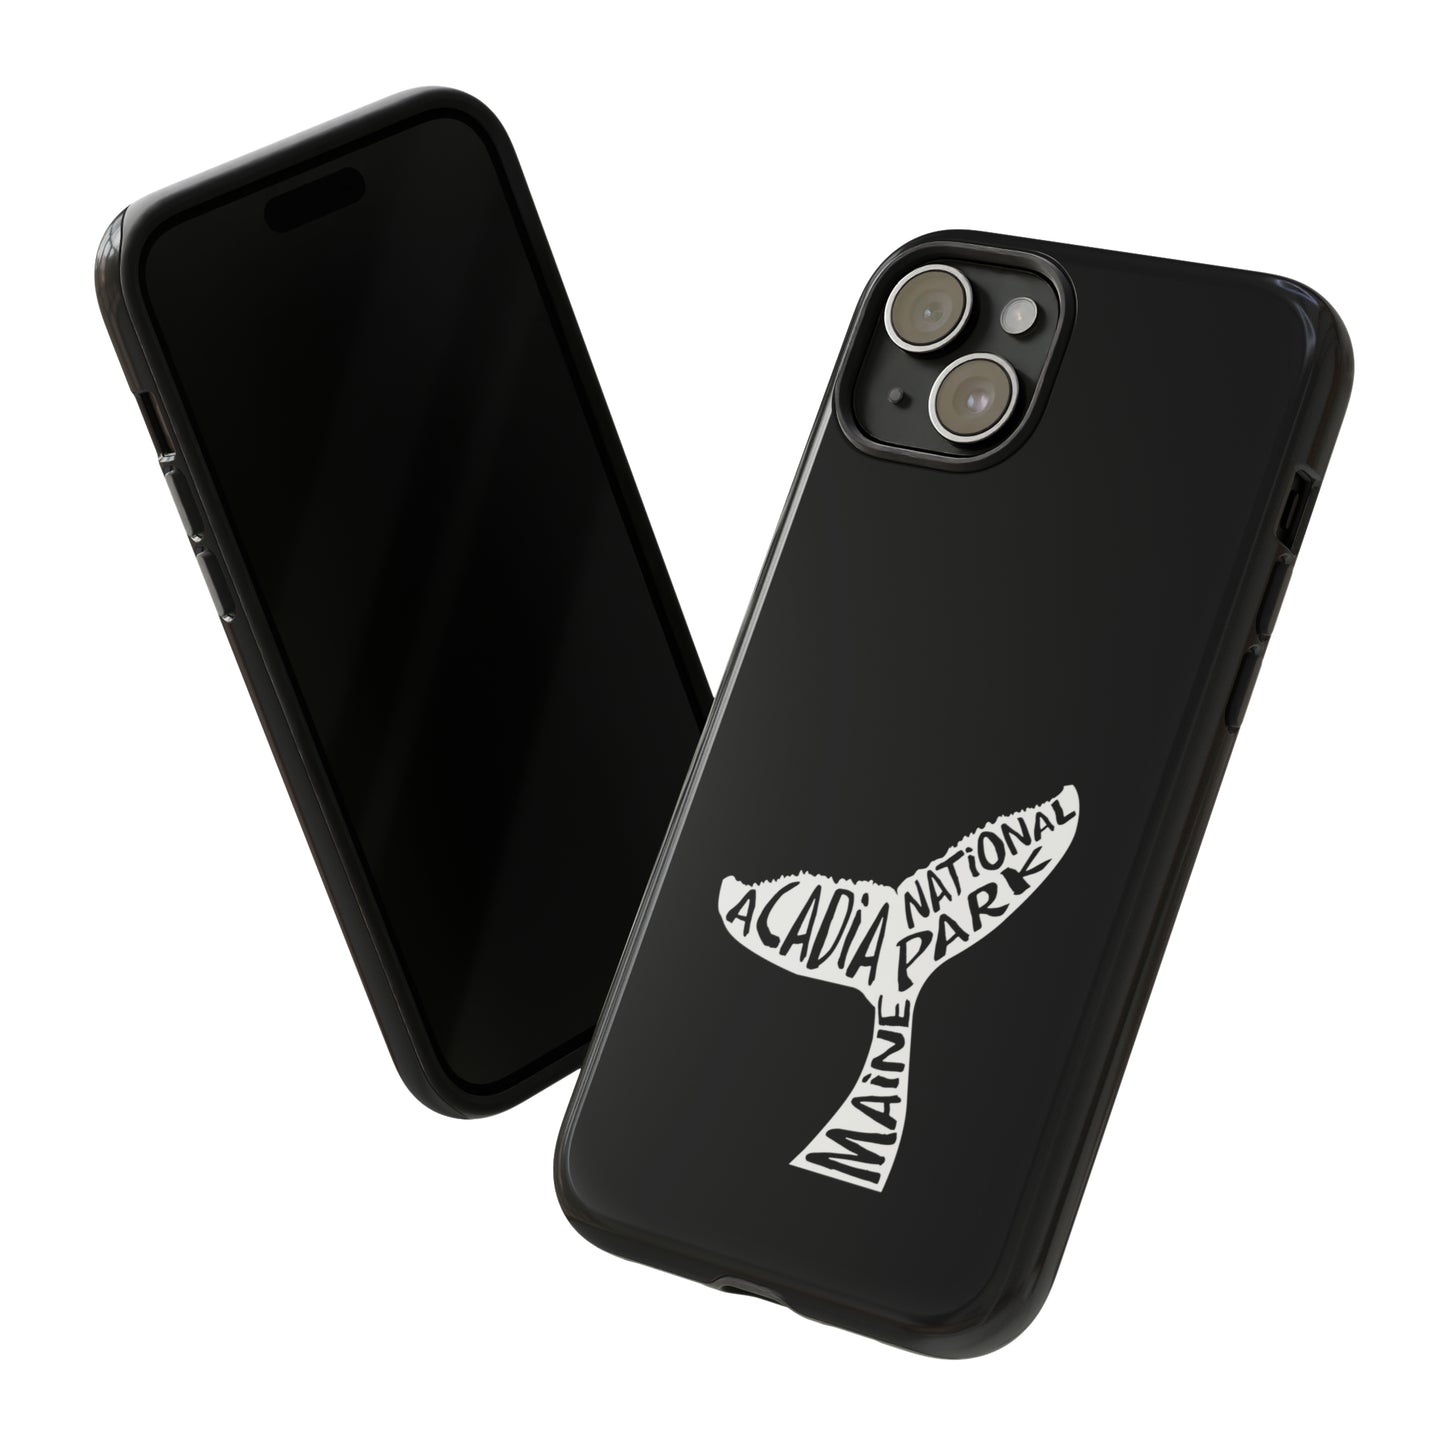 Acadia National Park Phone Case - Humpback Whale Tail Design